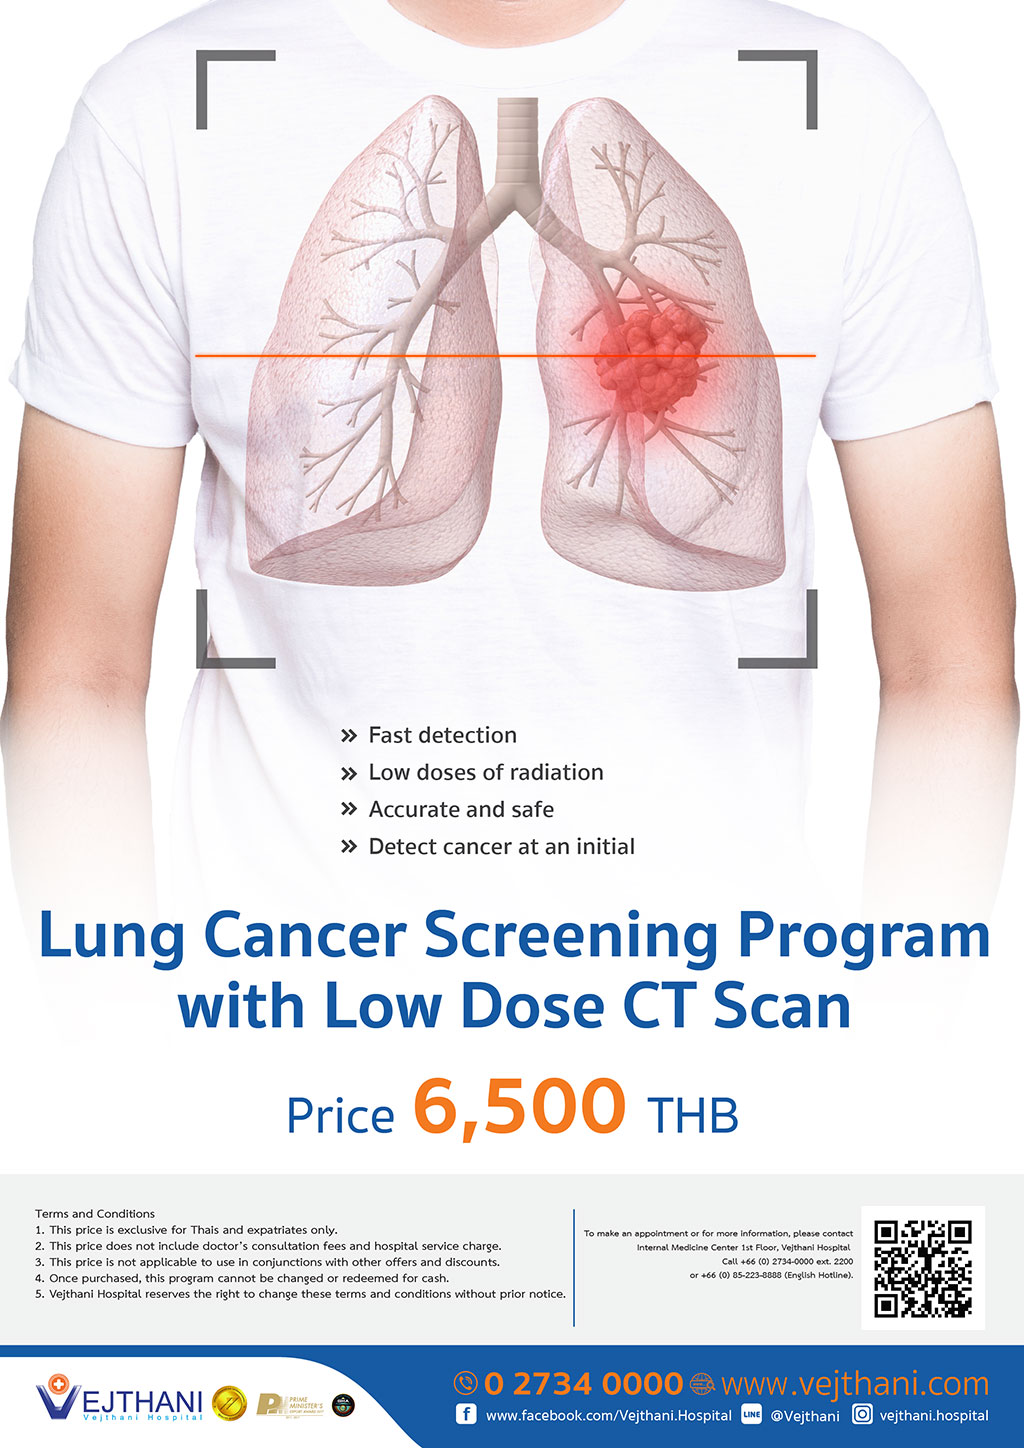 Lung Cancer Screening Program with Low Dose CT Scan